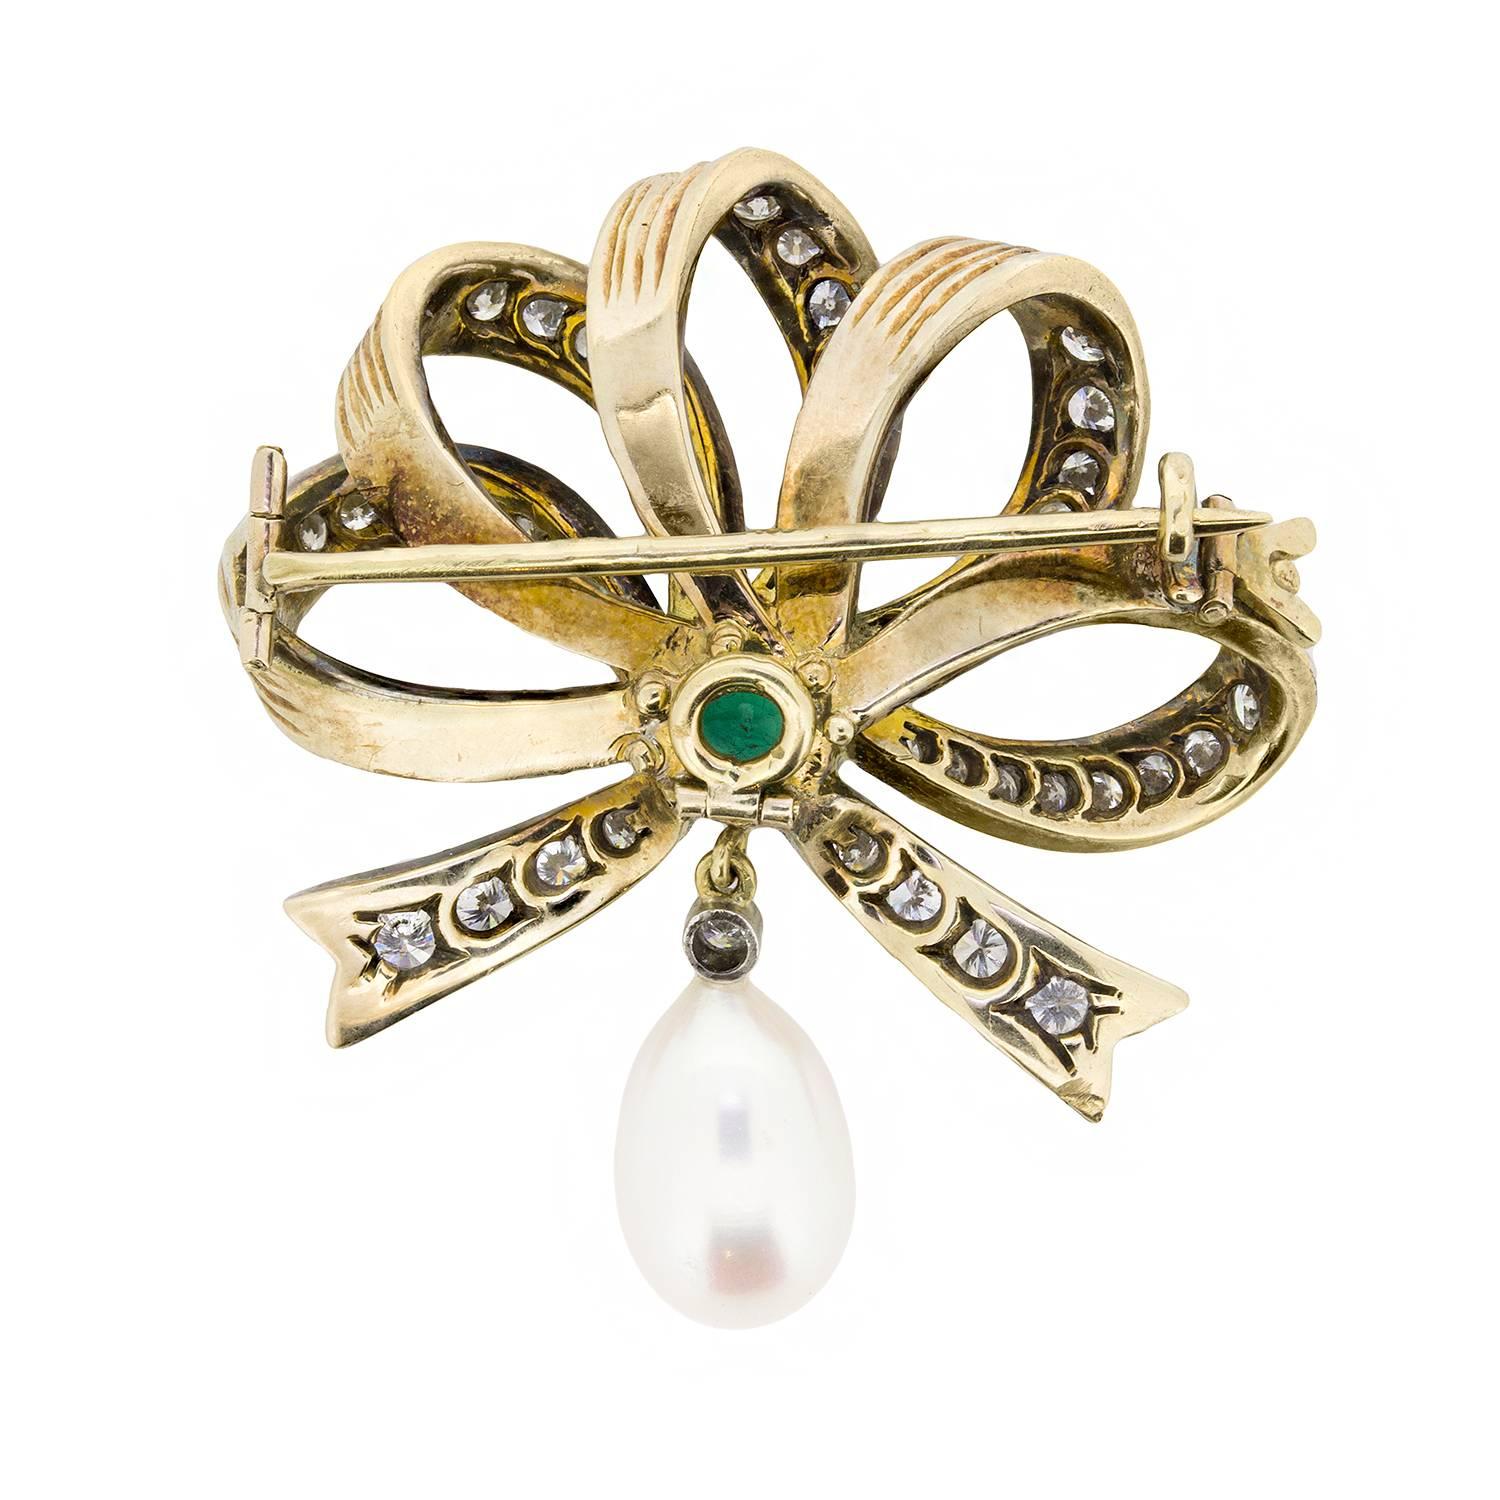 This stunning and vintage brooch is an elegant gift for any lady. The expertly designed bow is grain set with sparkling transitional cut diamonds. They have a combined total weight of 1.60 carats, and at the centre of the bow is a deep green